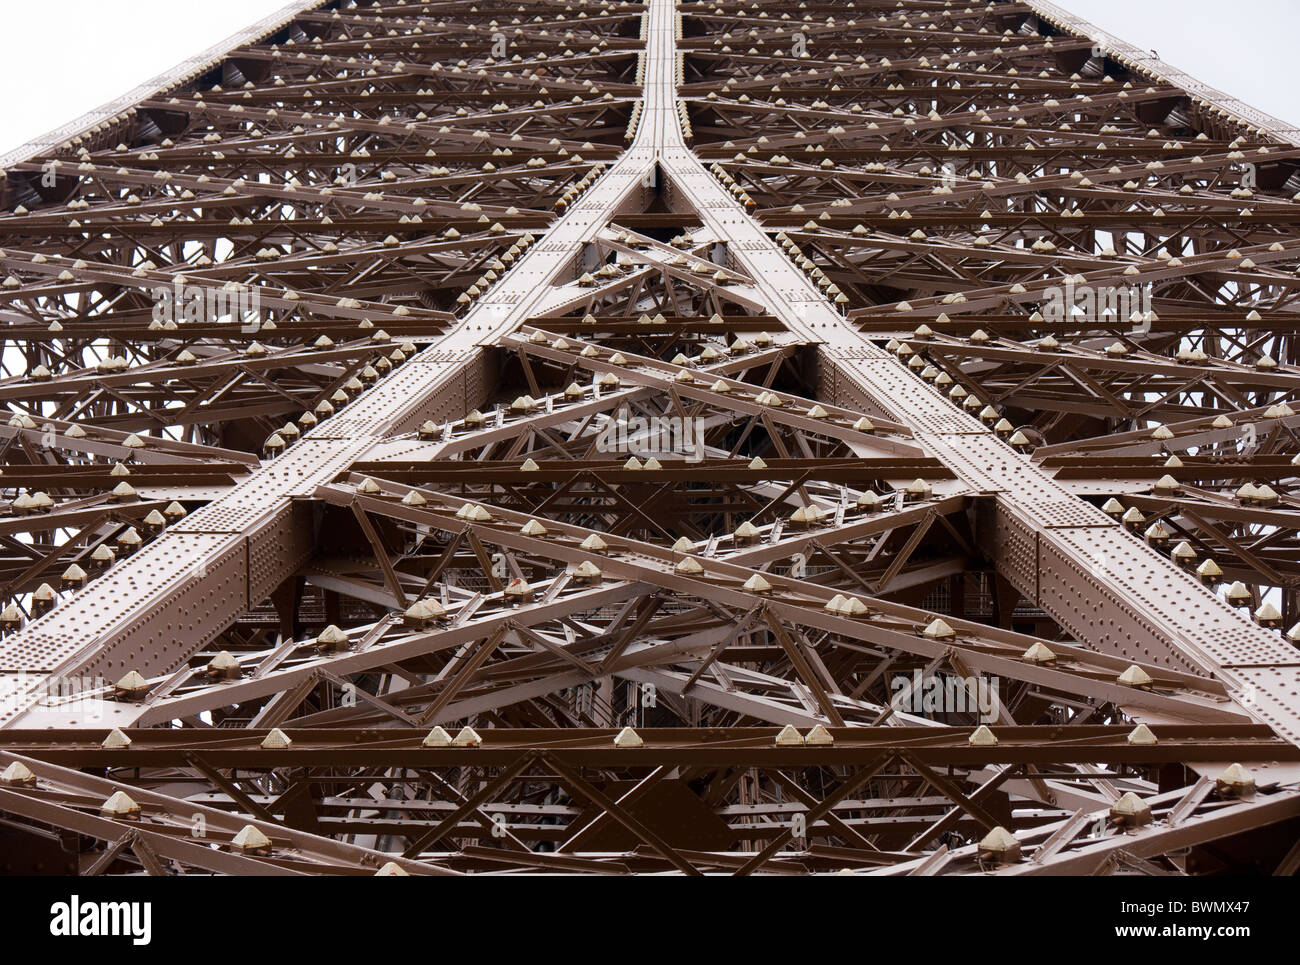 close up detail of top 3rd stage section of Tour Eiffel (Eiffel Tower) Paris France Stock Photo